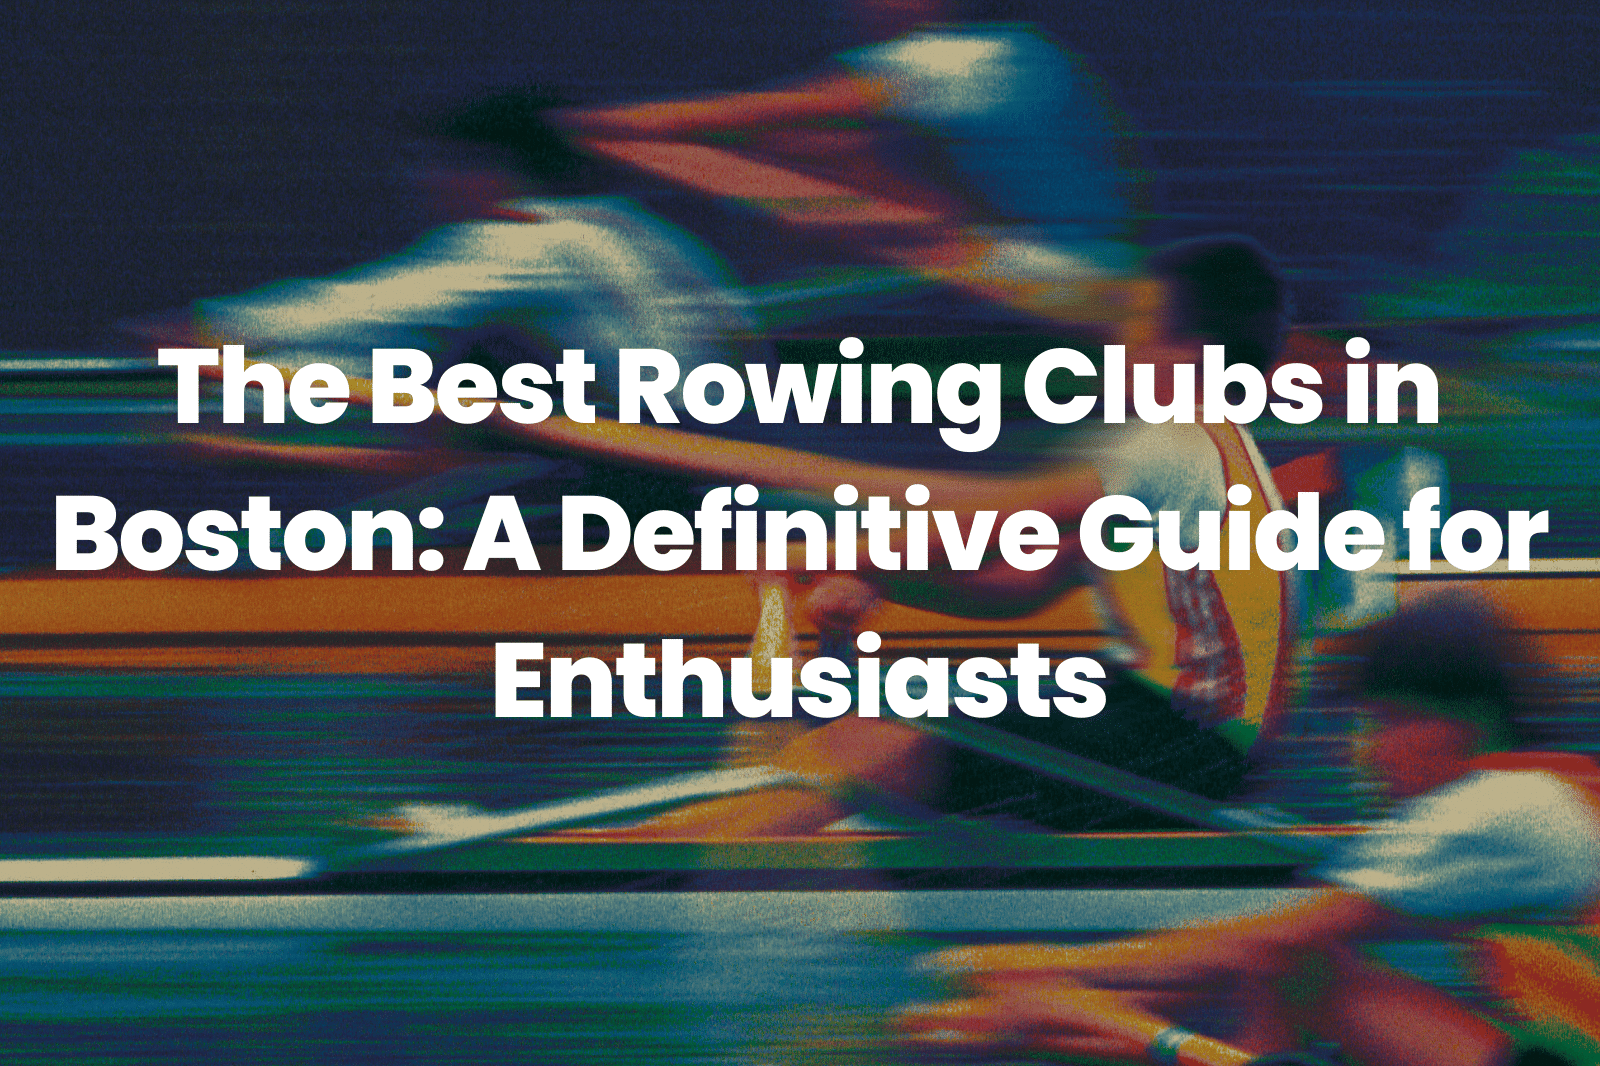 The Best Rowing Clubs in Boston